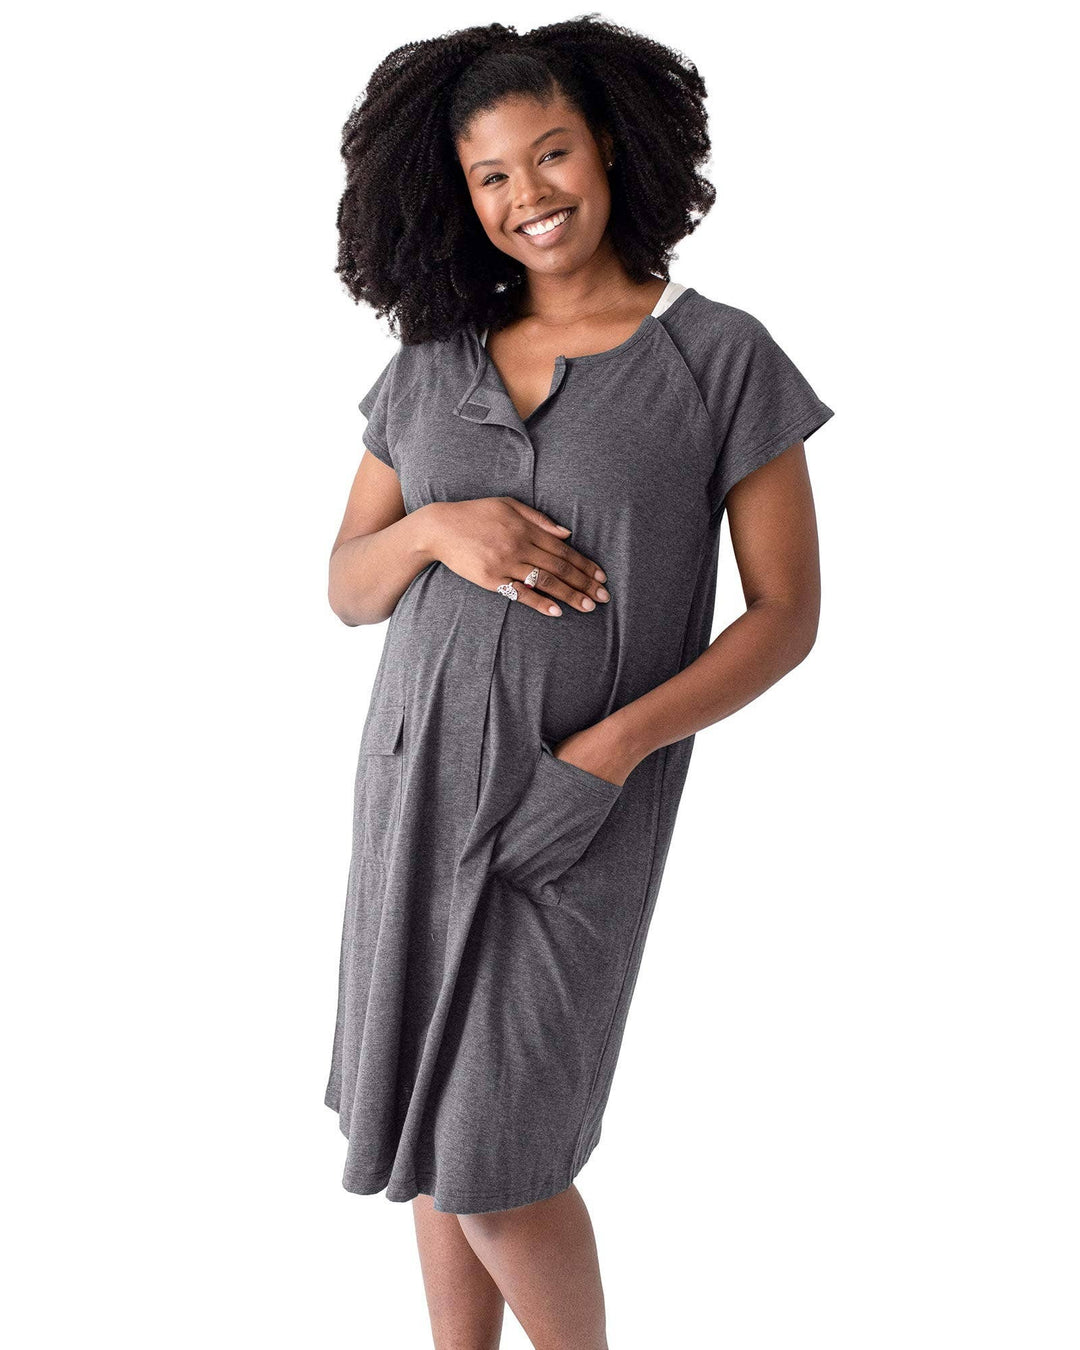 Kindred Bravely - 3 In 1 Universal Labor, Delivery & Nursing Gown Grey Heather